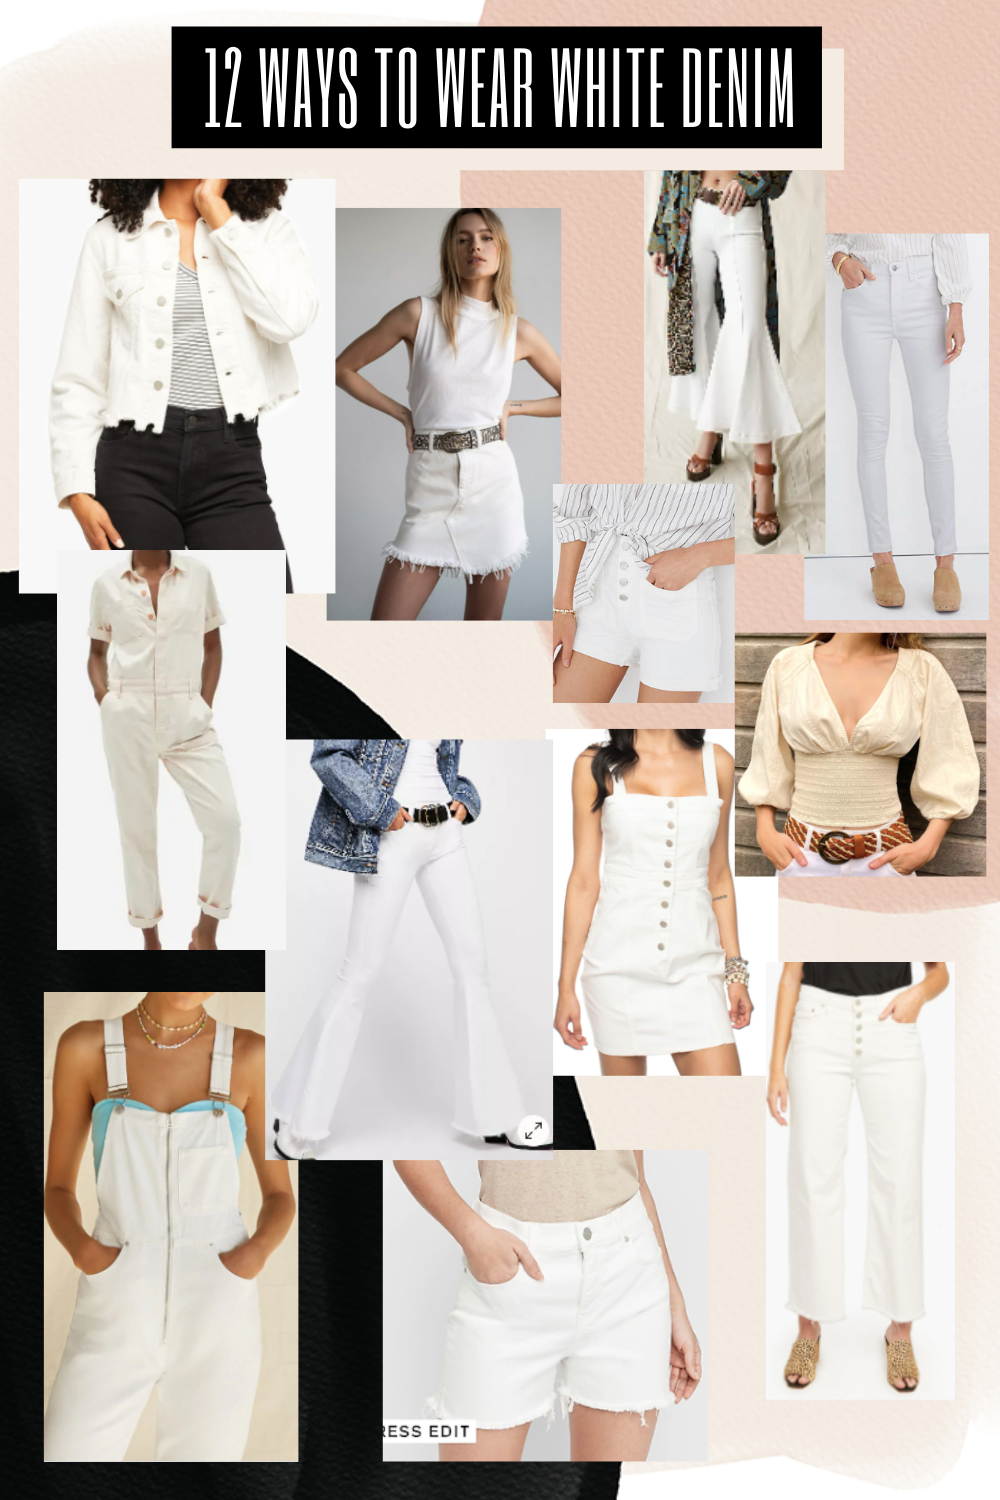 A Summer Outfit I LOVE: White Flares + A Denim Jacket - The Mom Edit